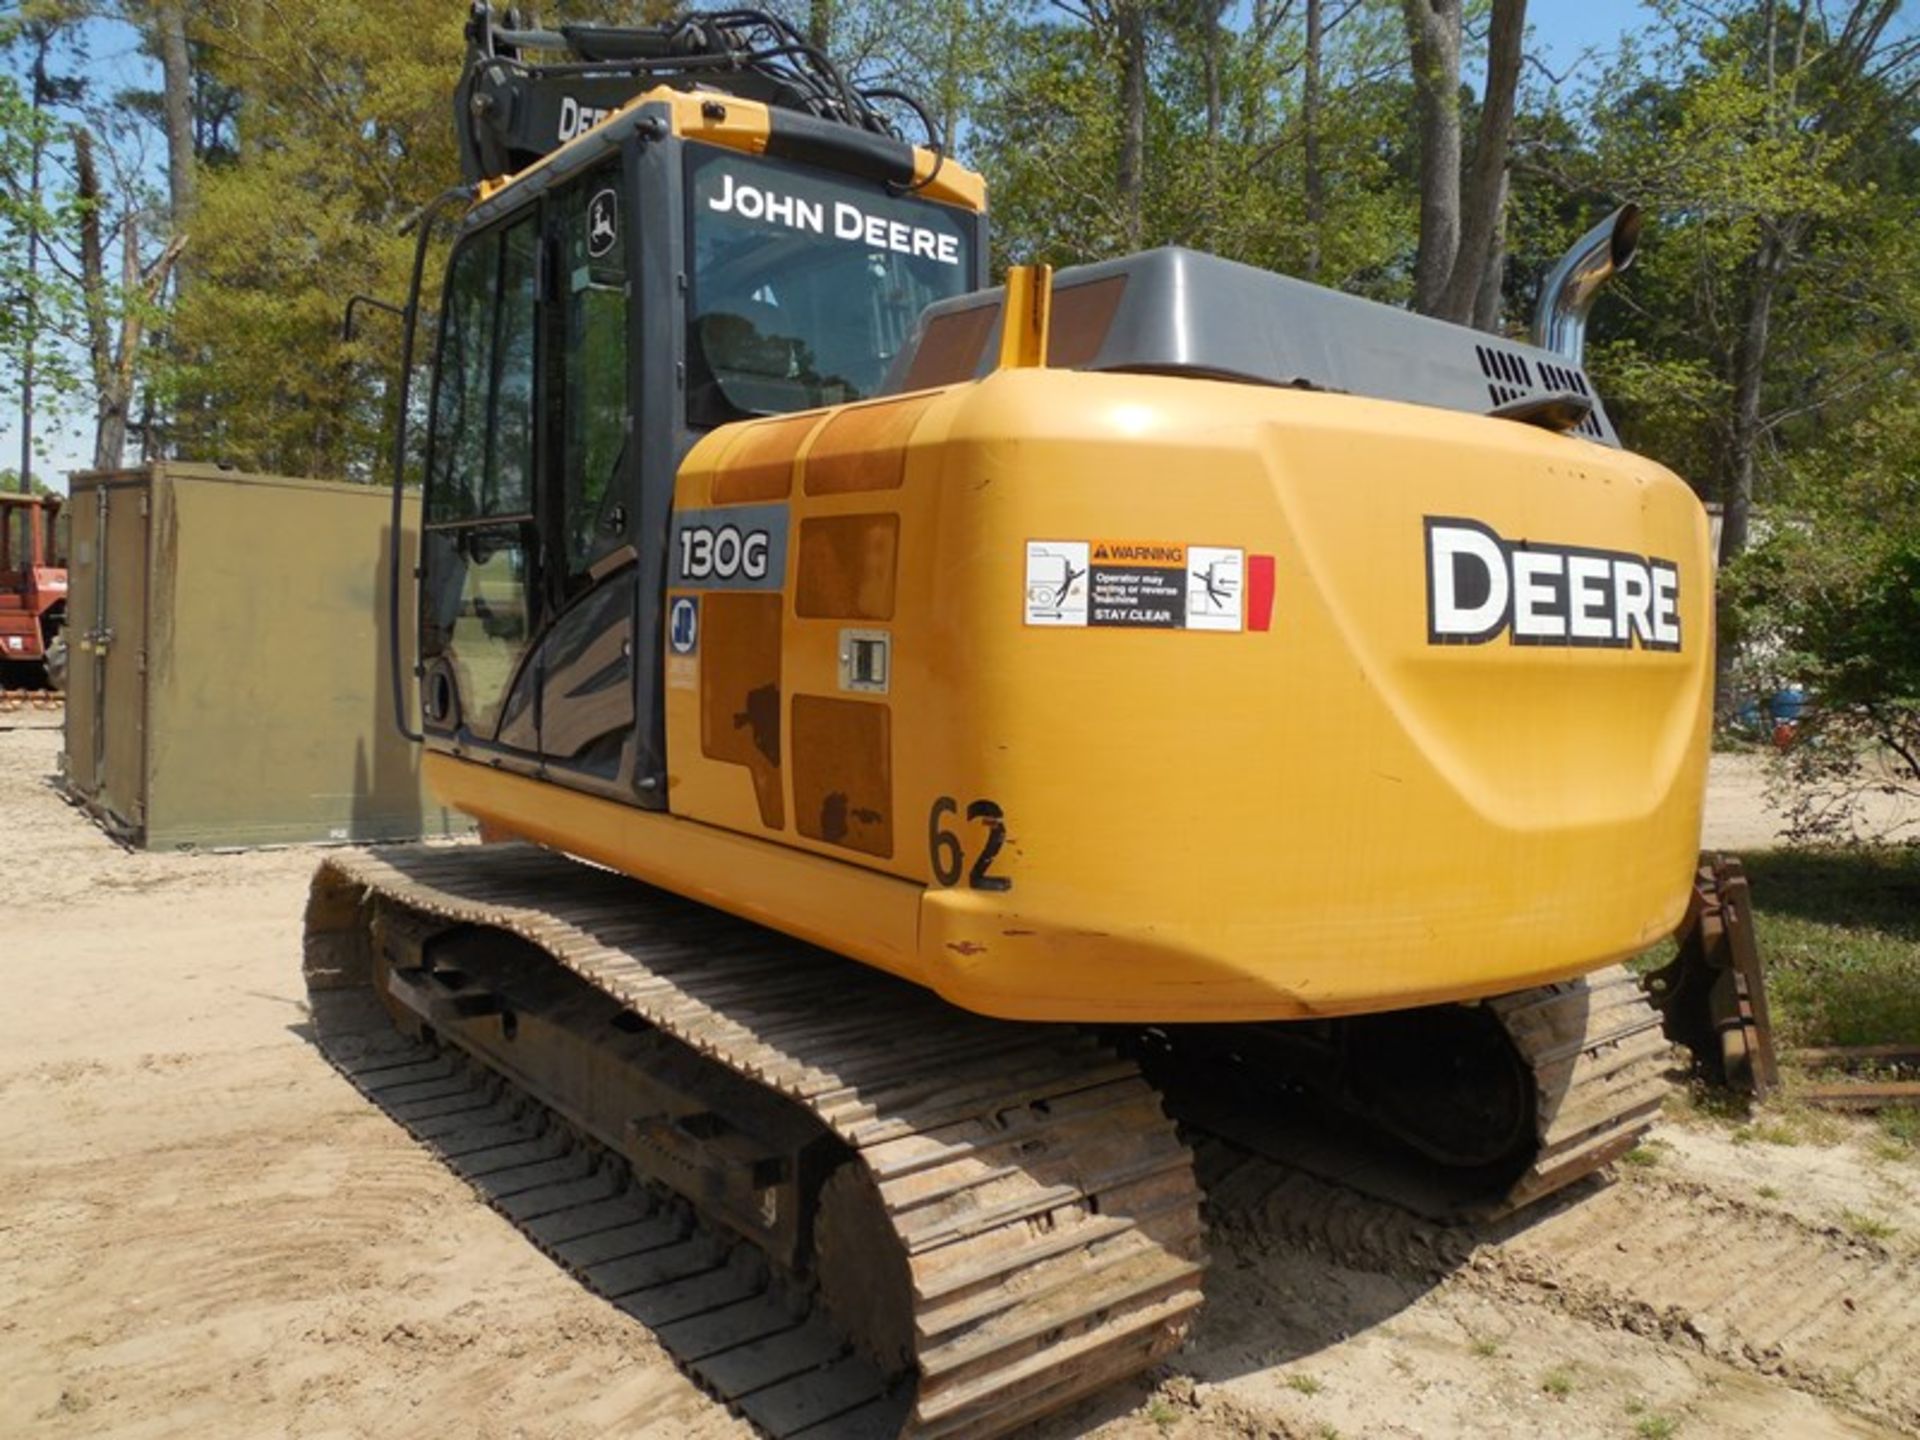 2015 Deere 130G Excavator 2191 hrs Cab / AC Long Arm, 28" Pads, 24" Bucket, Control Pattern Select - Image 6 of 9